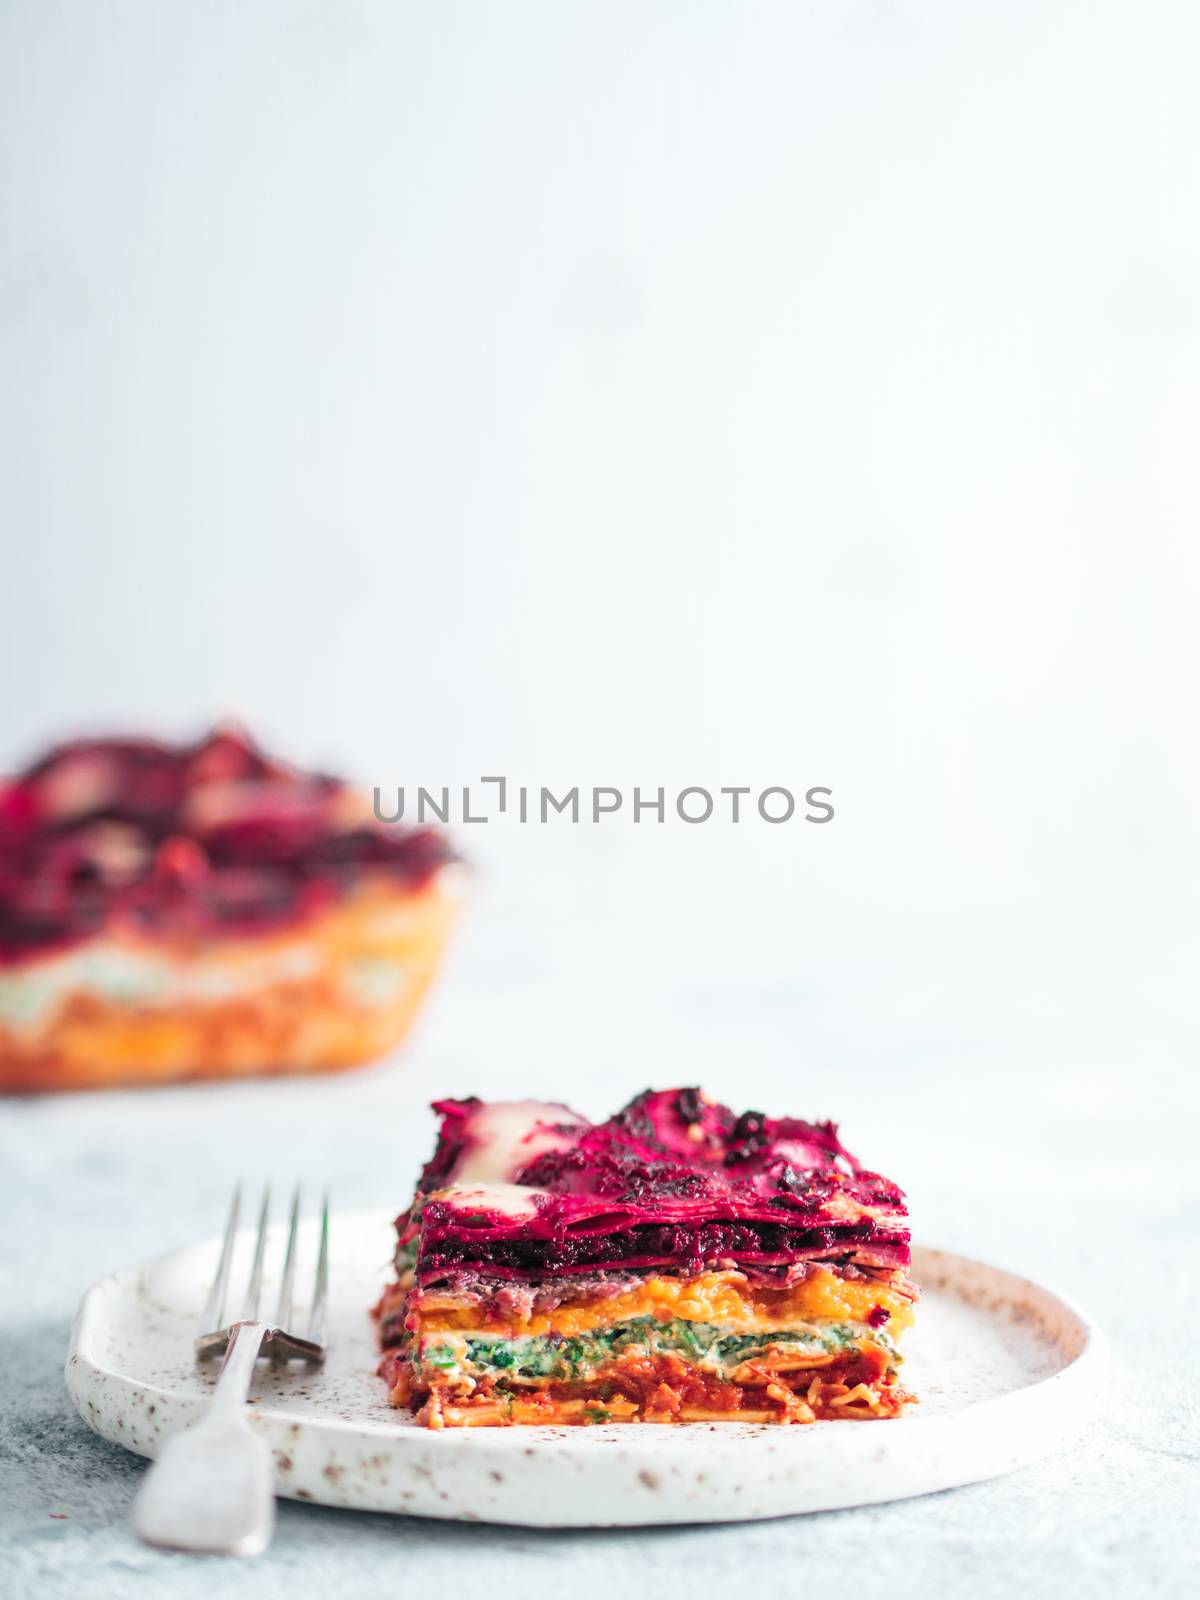 Vegetable Packed Rainbow Lasagne on craft plate.Ideas and recipes for healthy vegetarian dinner or lunch. Lasagne with beetroot,pumpkin,mushrooms,ricotta,spinach,mozarella on white table. Copy space